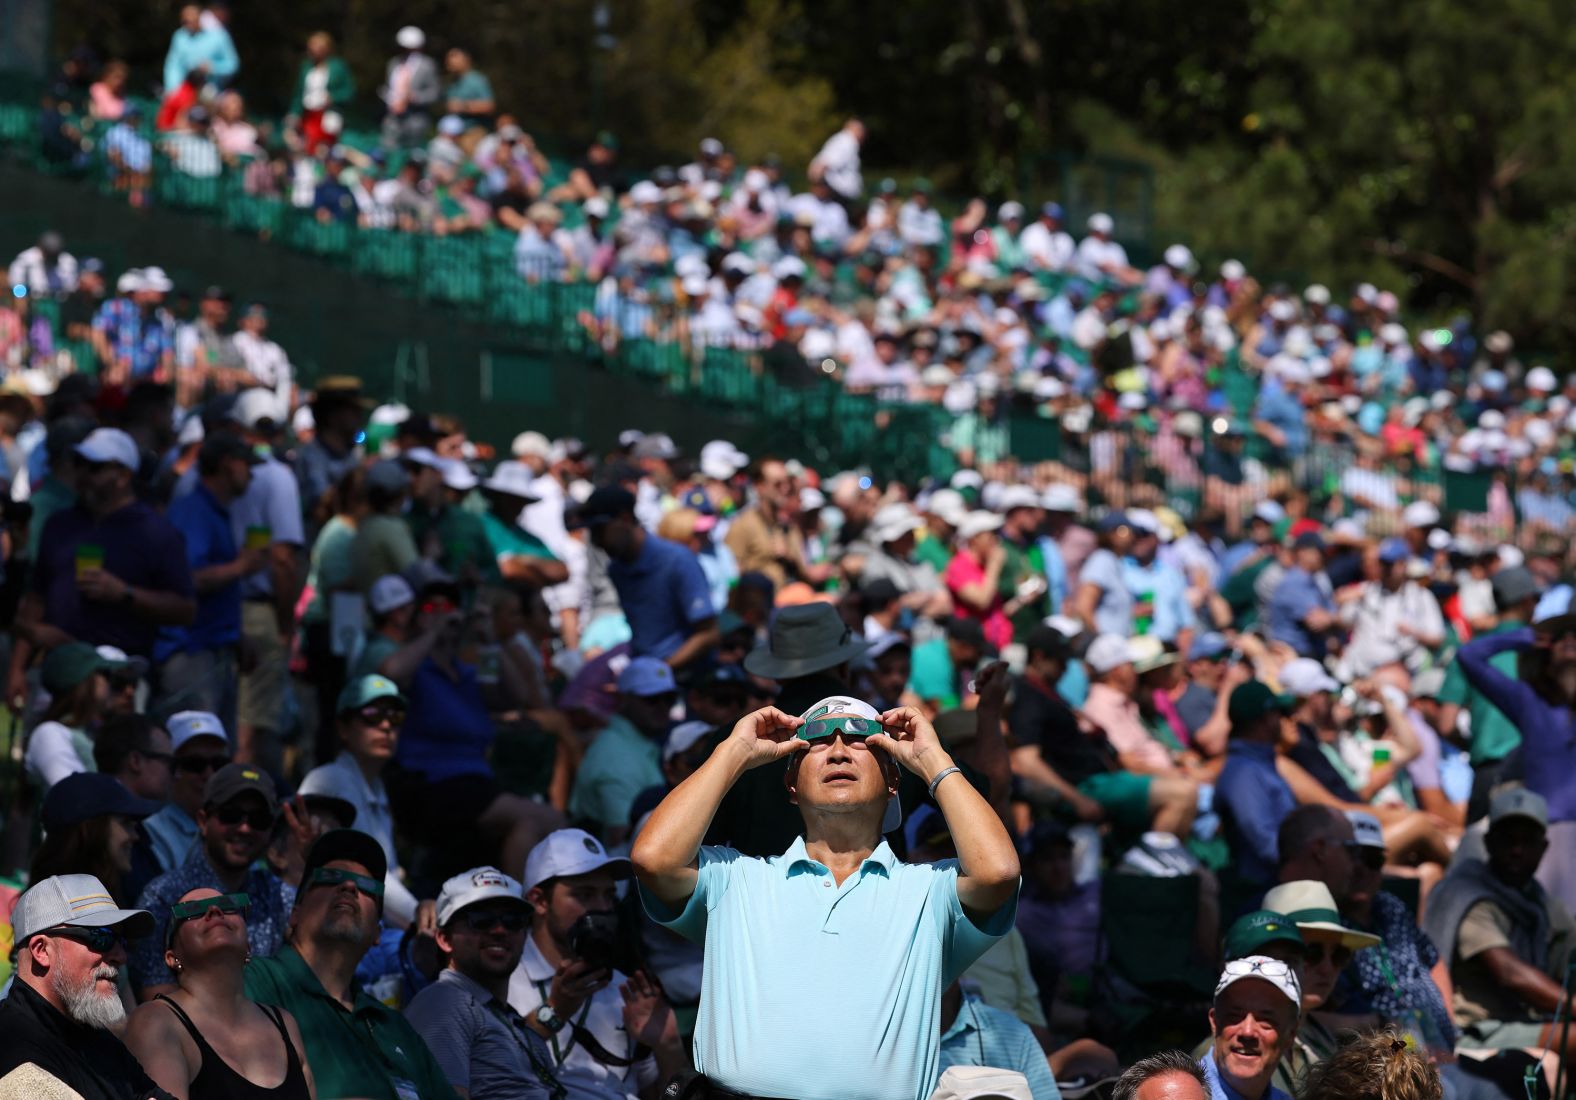 People watch the eclipse from the Augusta National Golf Club in Georgia, where practice rounds were being held ahead of the Masters tournament.